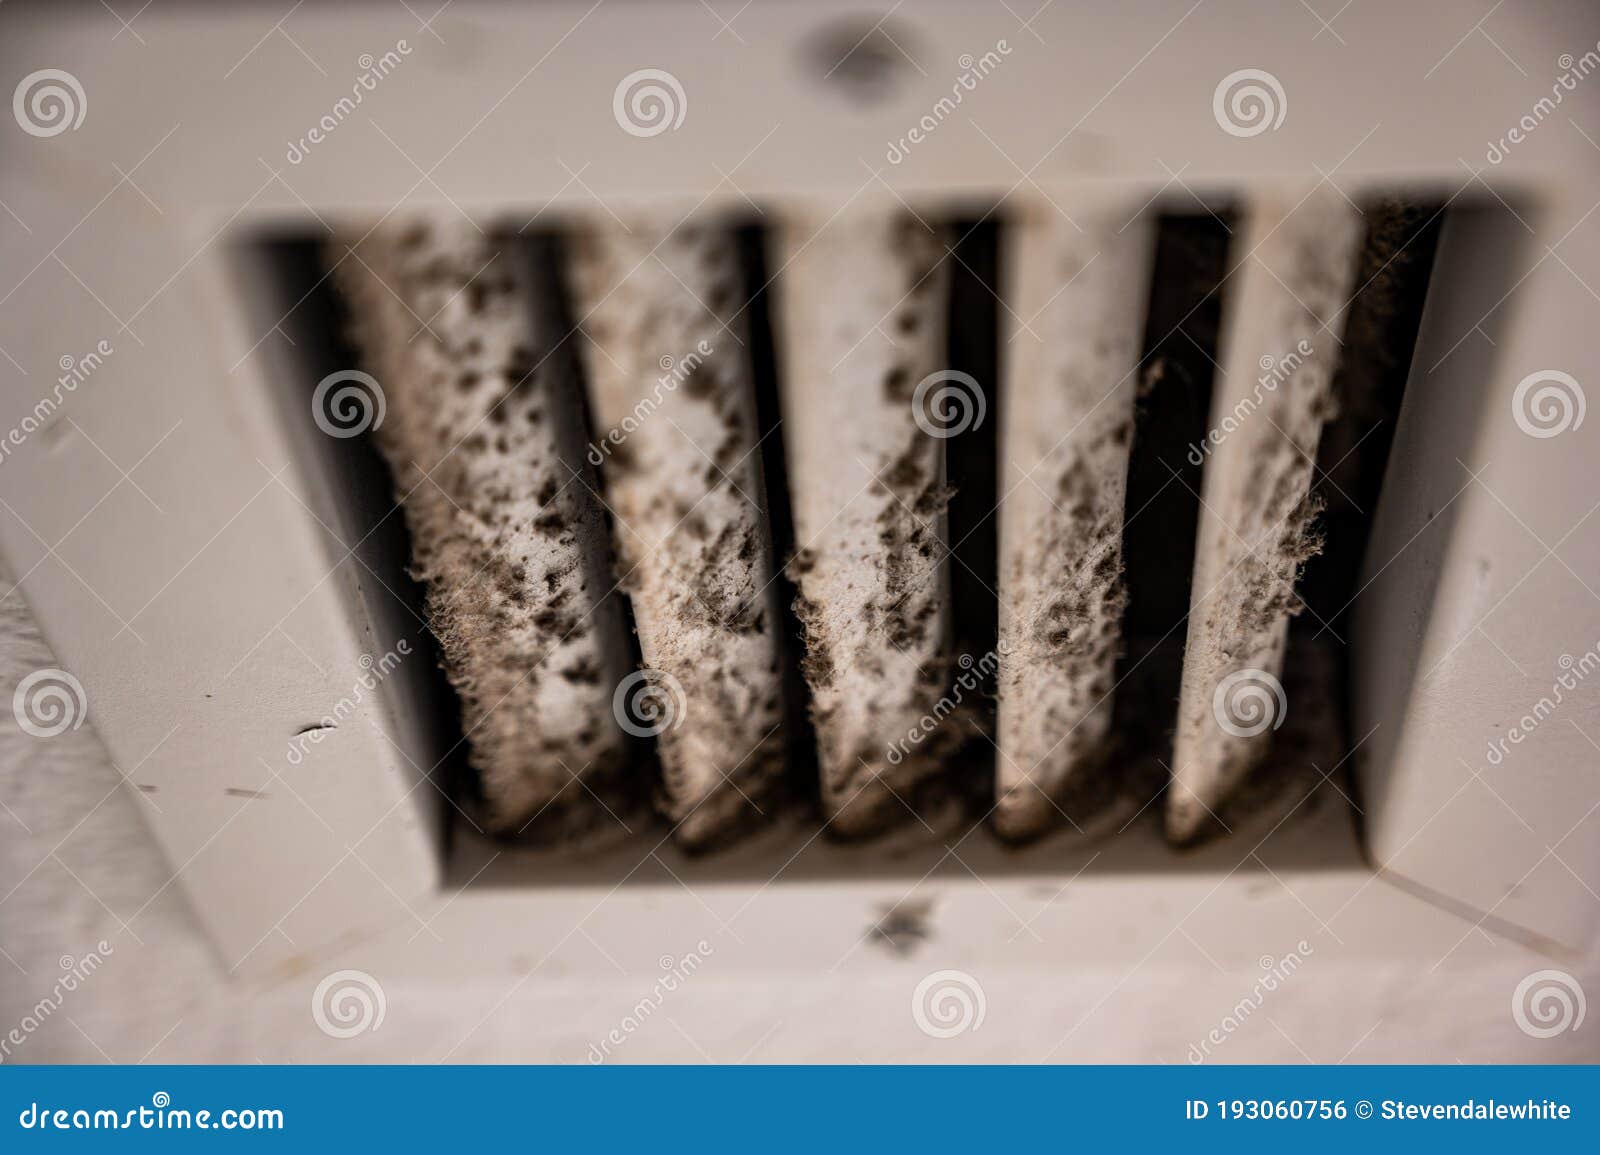 subjective focus on lint and dirt particles on a ceiling air vent